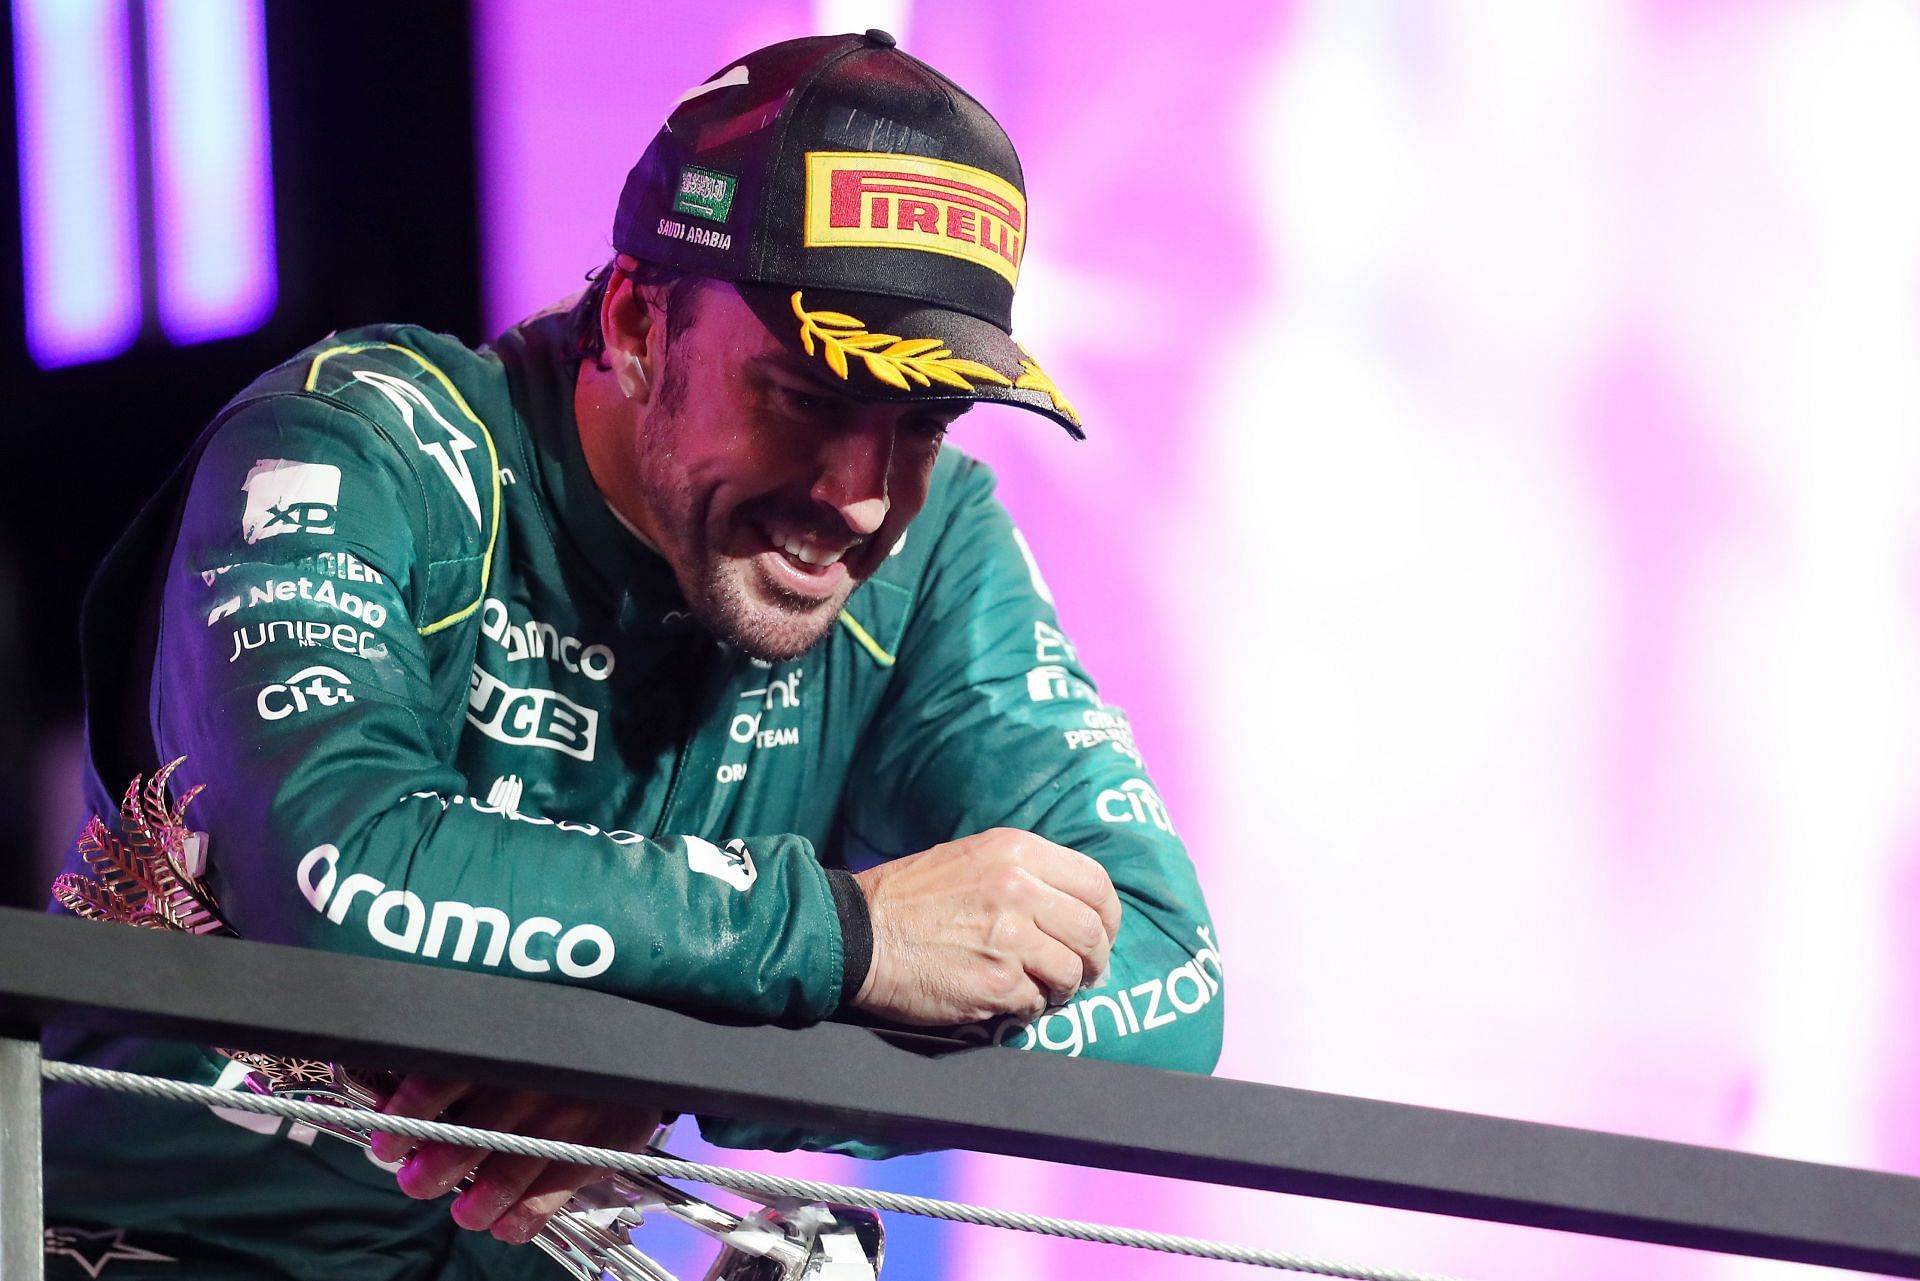 “It is painful” - Red Bull drivers react to Fernando Alonso’s penalty in the 2023 Saudi Arabian F1 GP